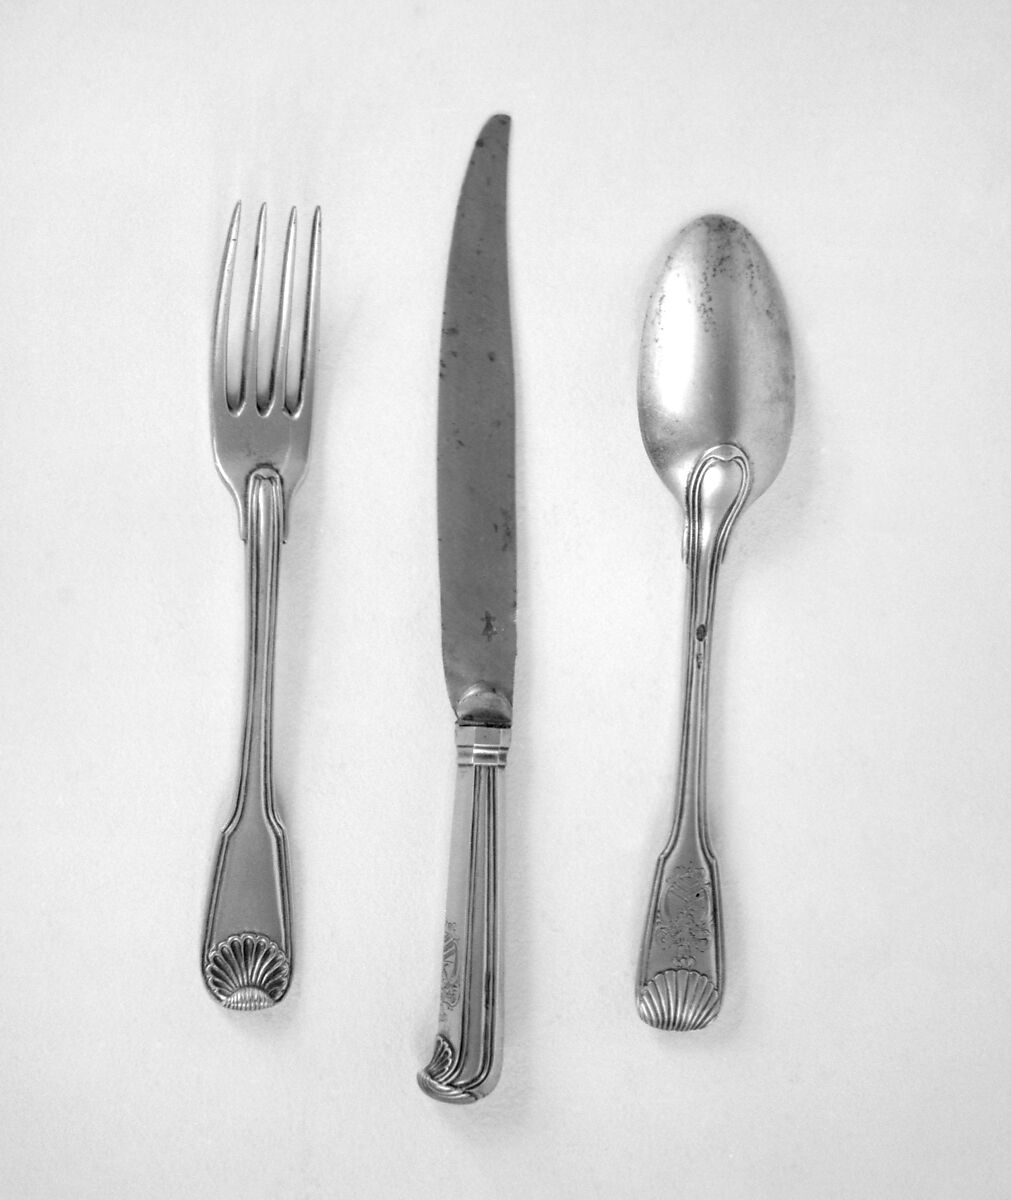 Spoon (part of a traveling set), Silver, French, Strasbourg 